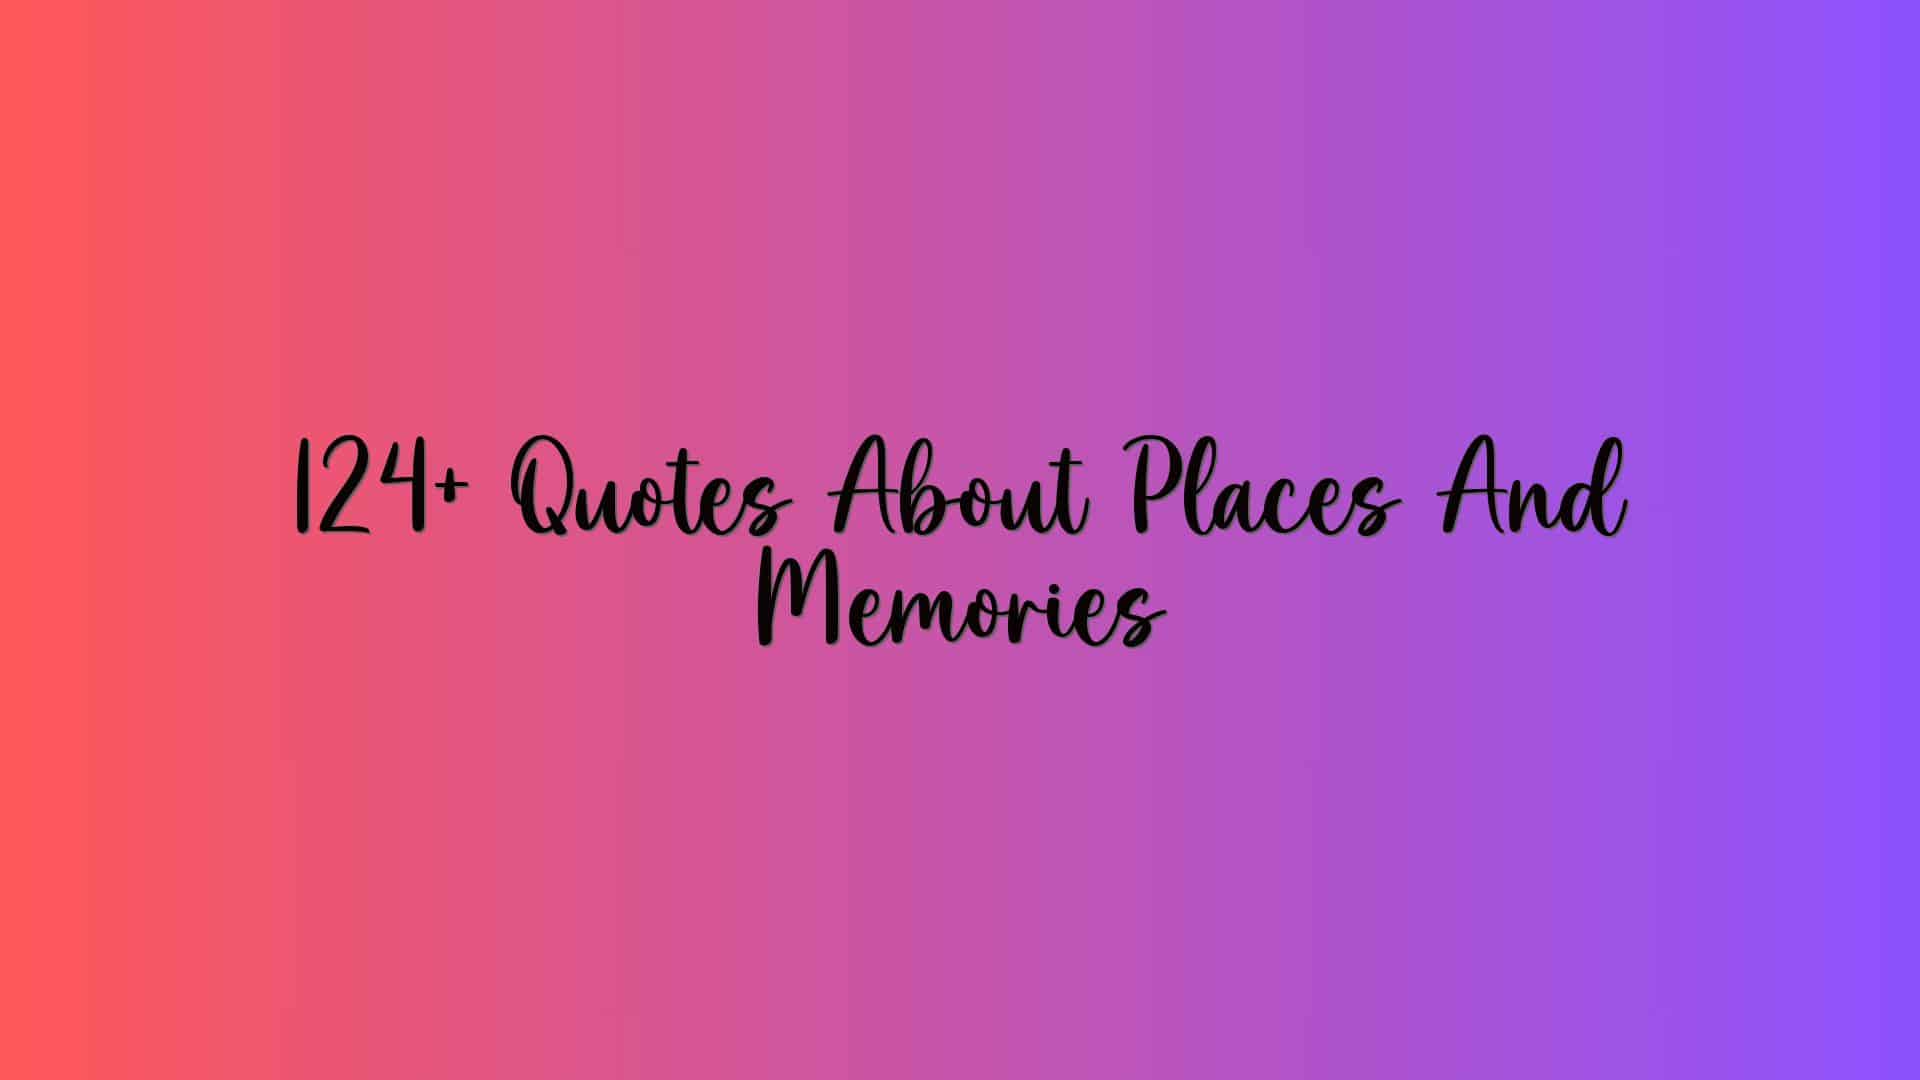 124+ Quotes About Places And Memories